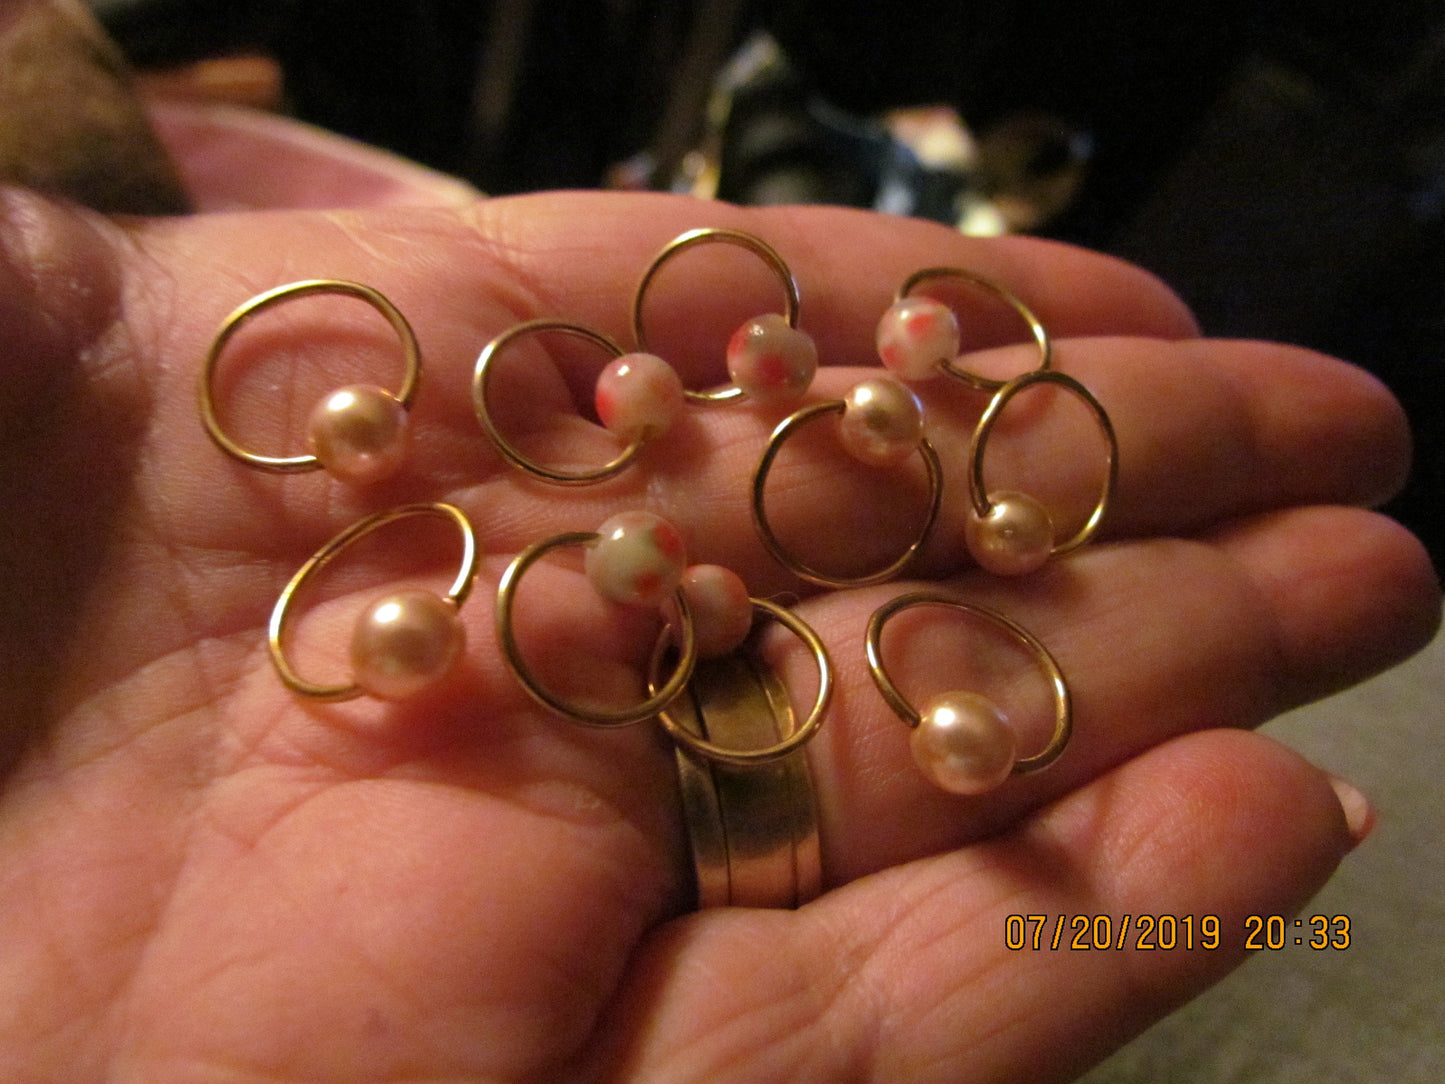 10 Pearl and Pink Flowers Stitch Markers Glass Beads